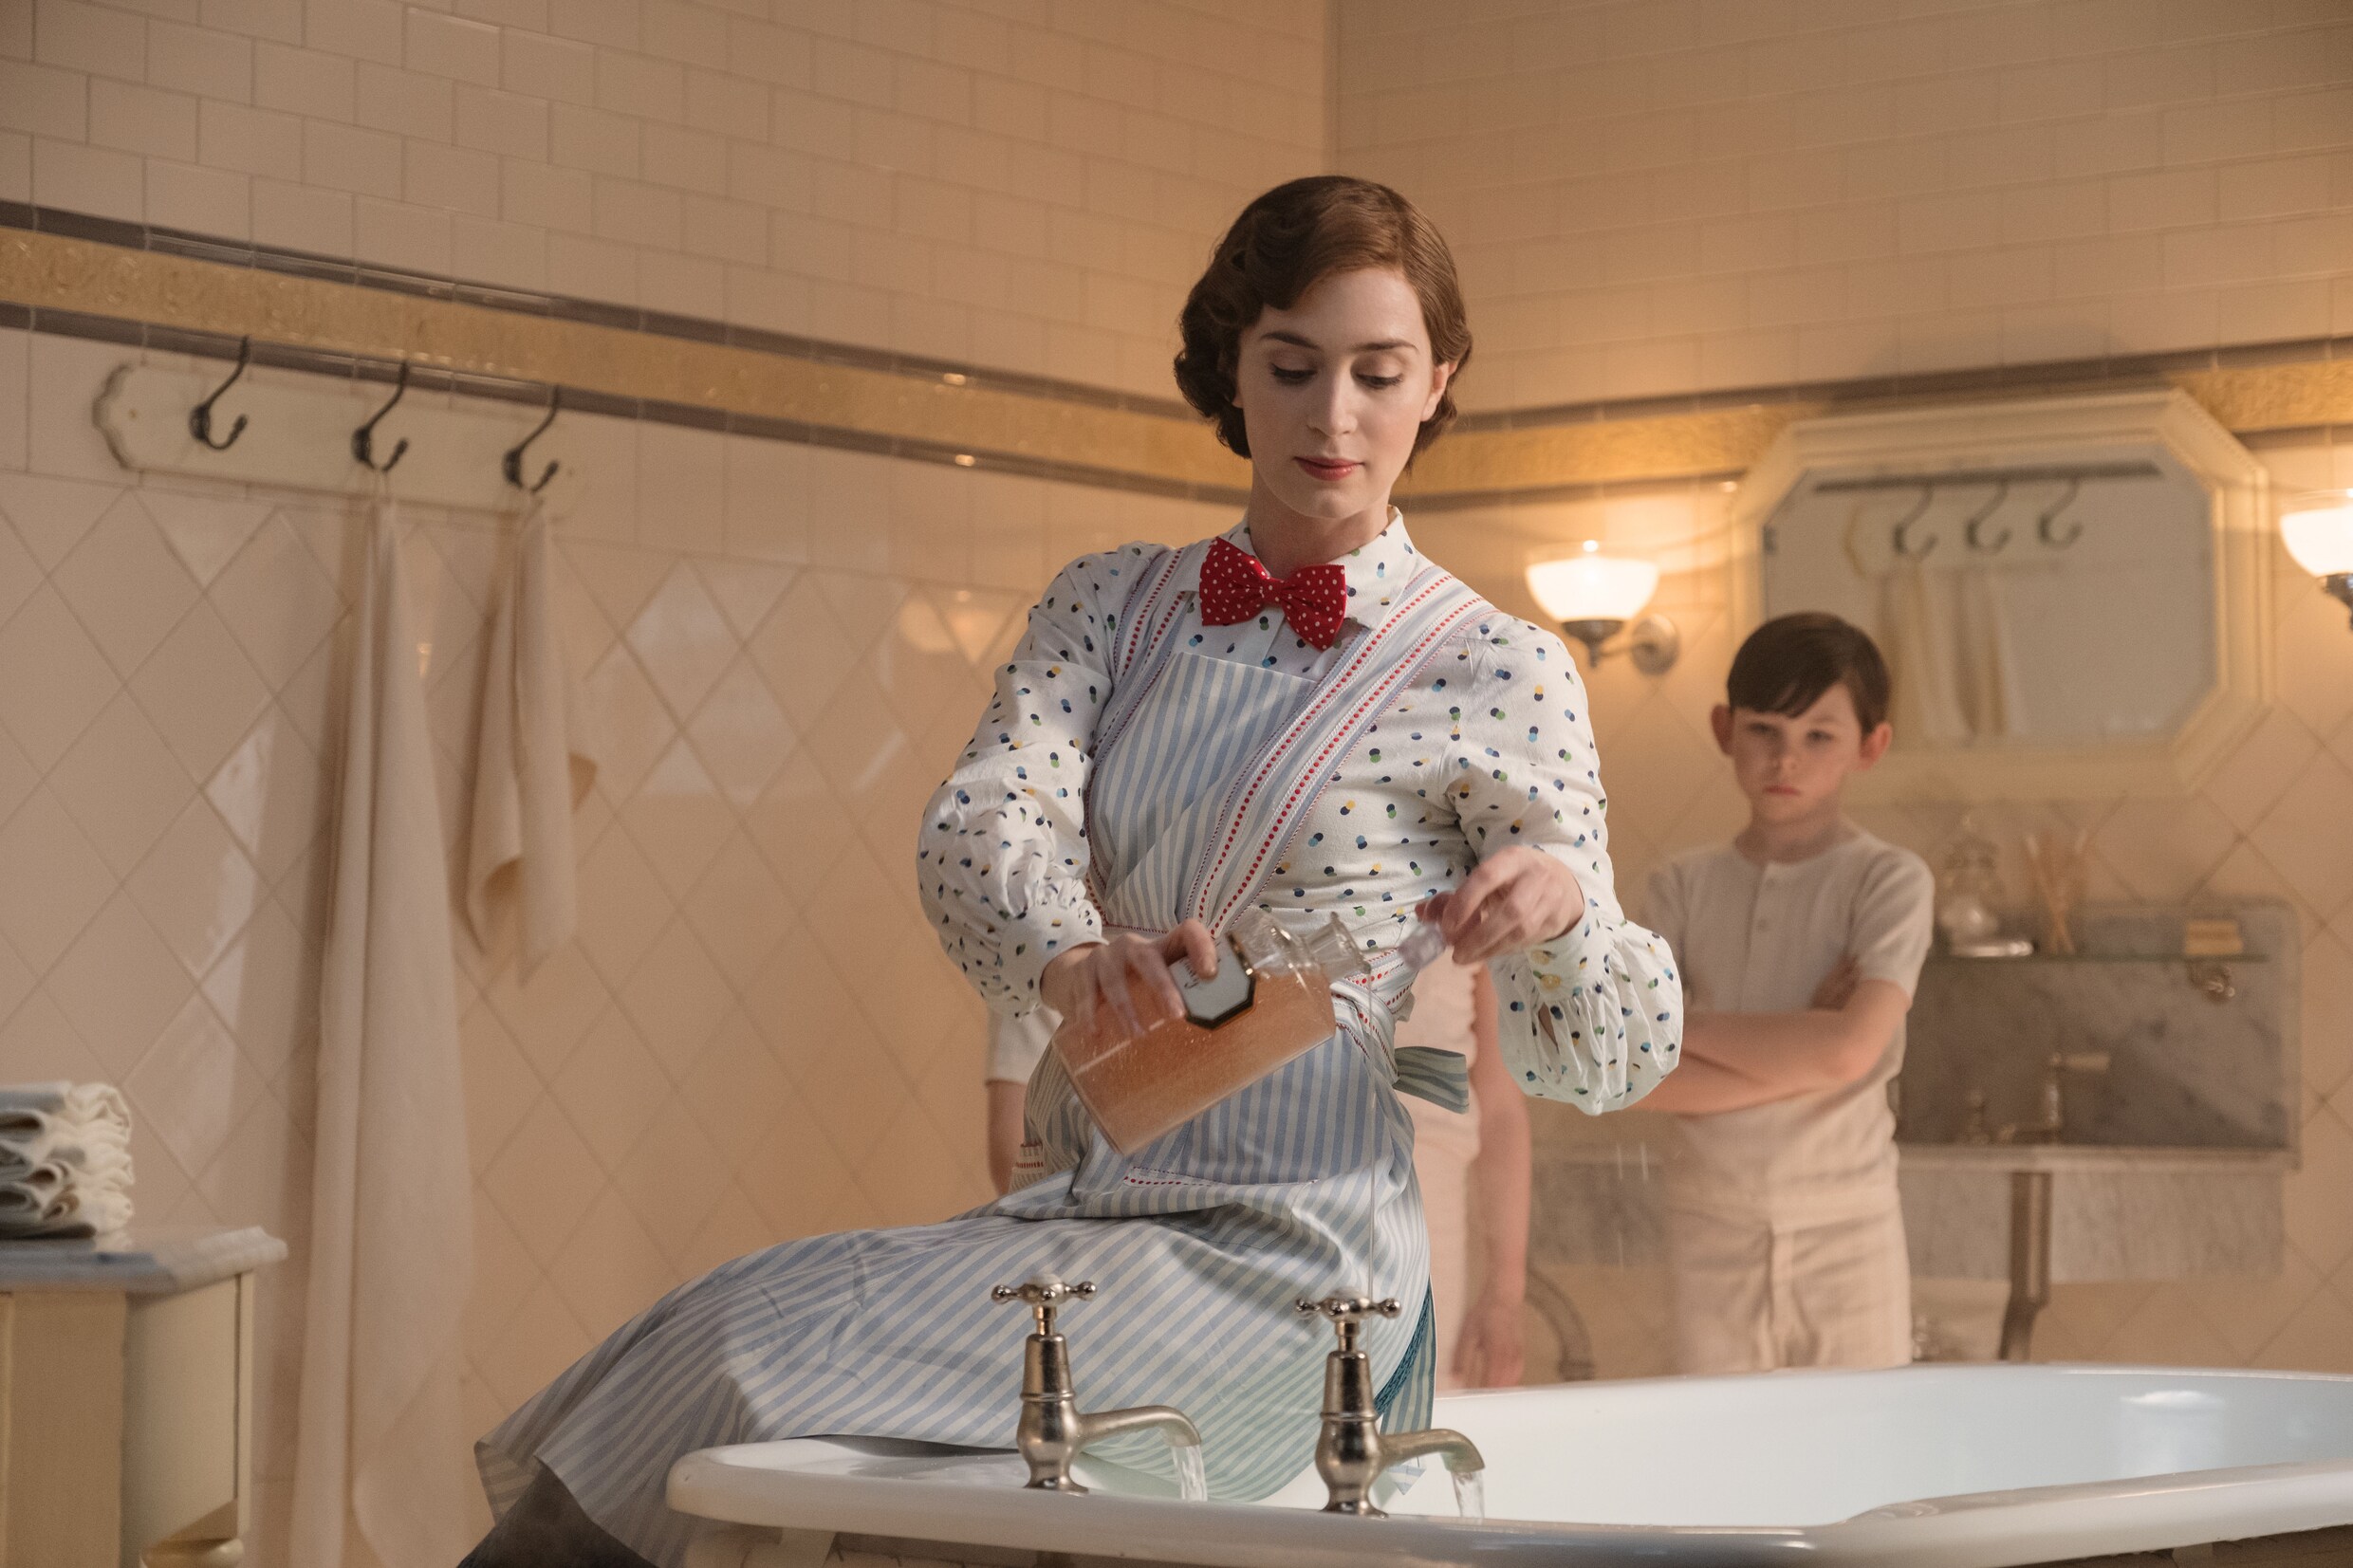 ‘Mary Poppins Returns’ is practically perfect in every way